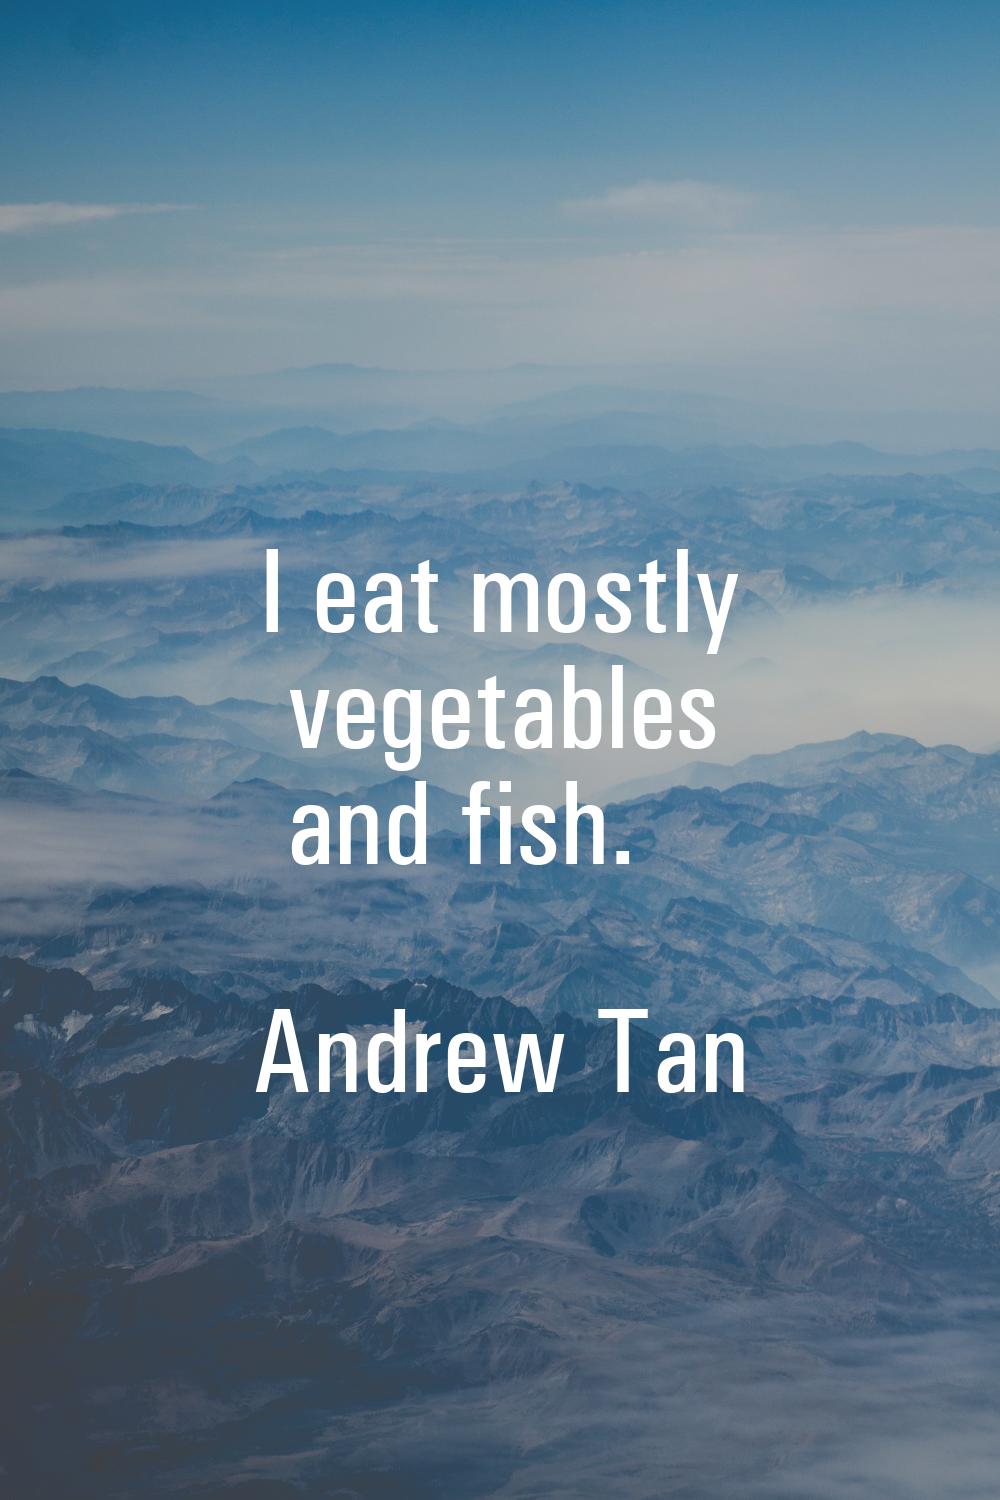 I eat mostly vegetables and fish.